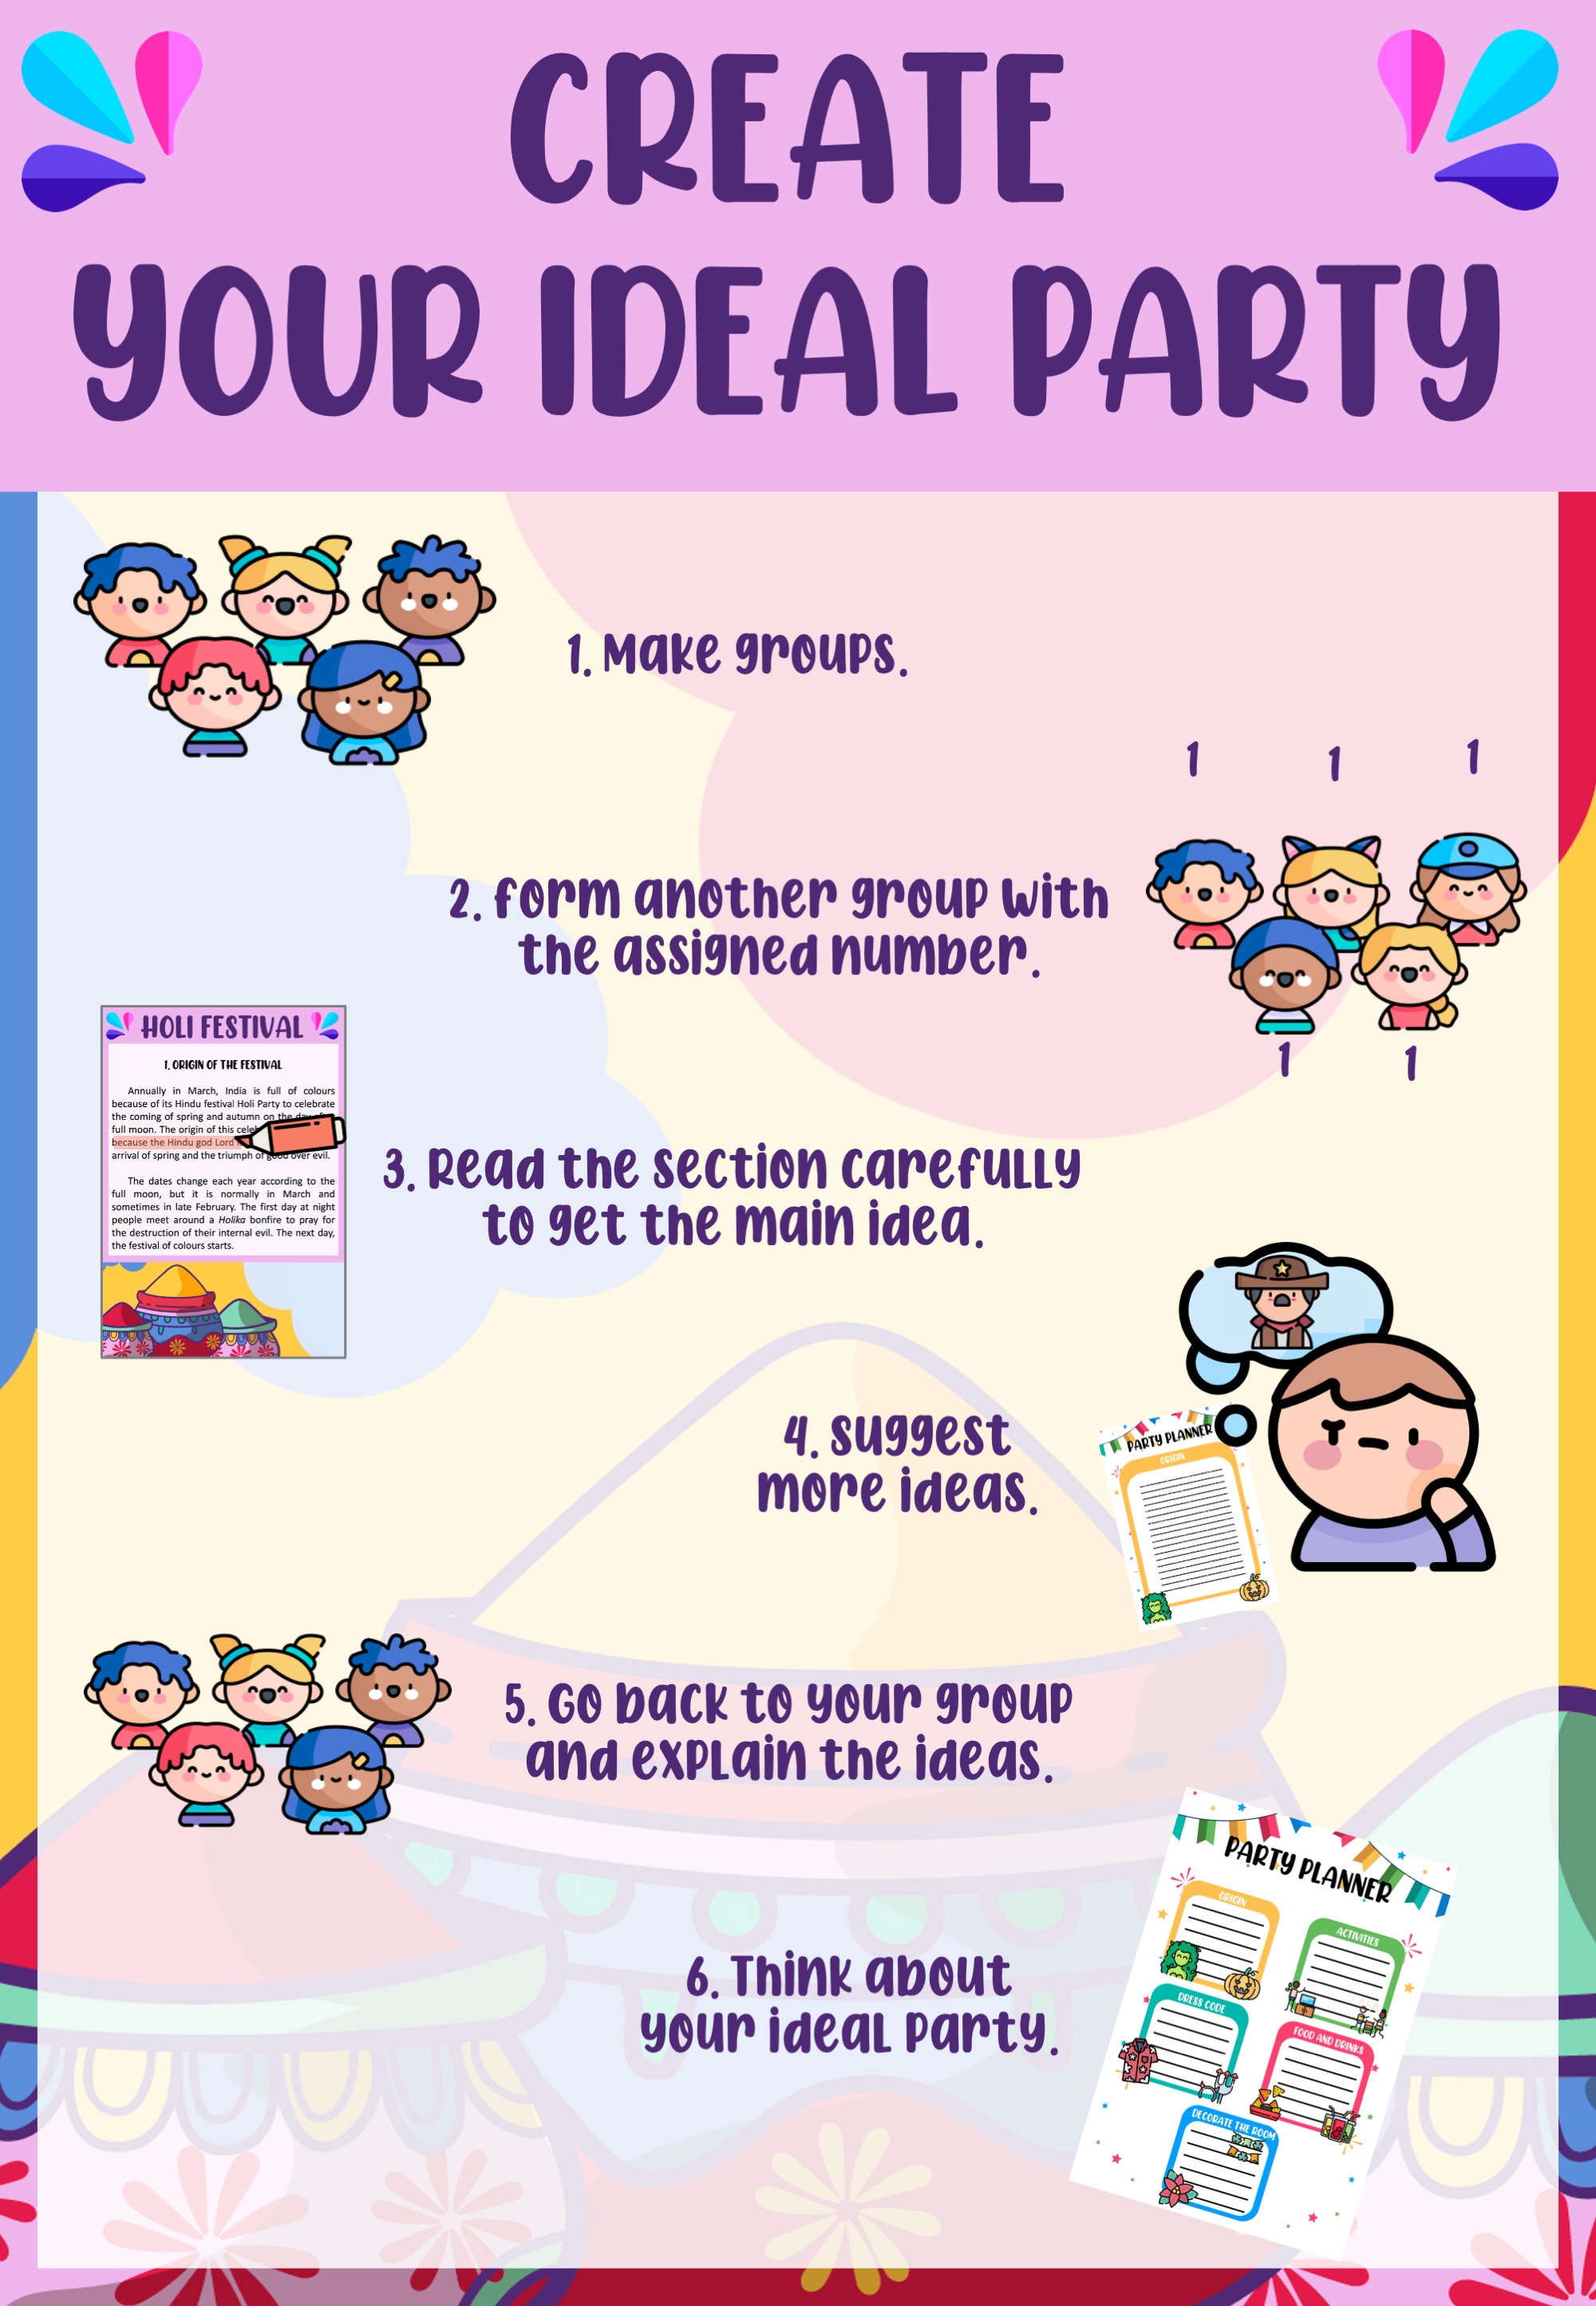 Create your ideal party